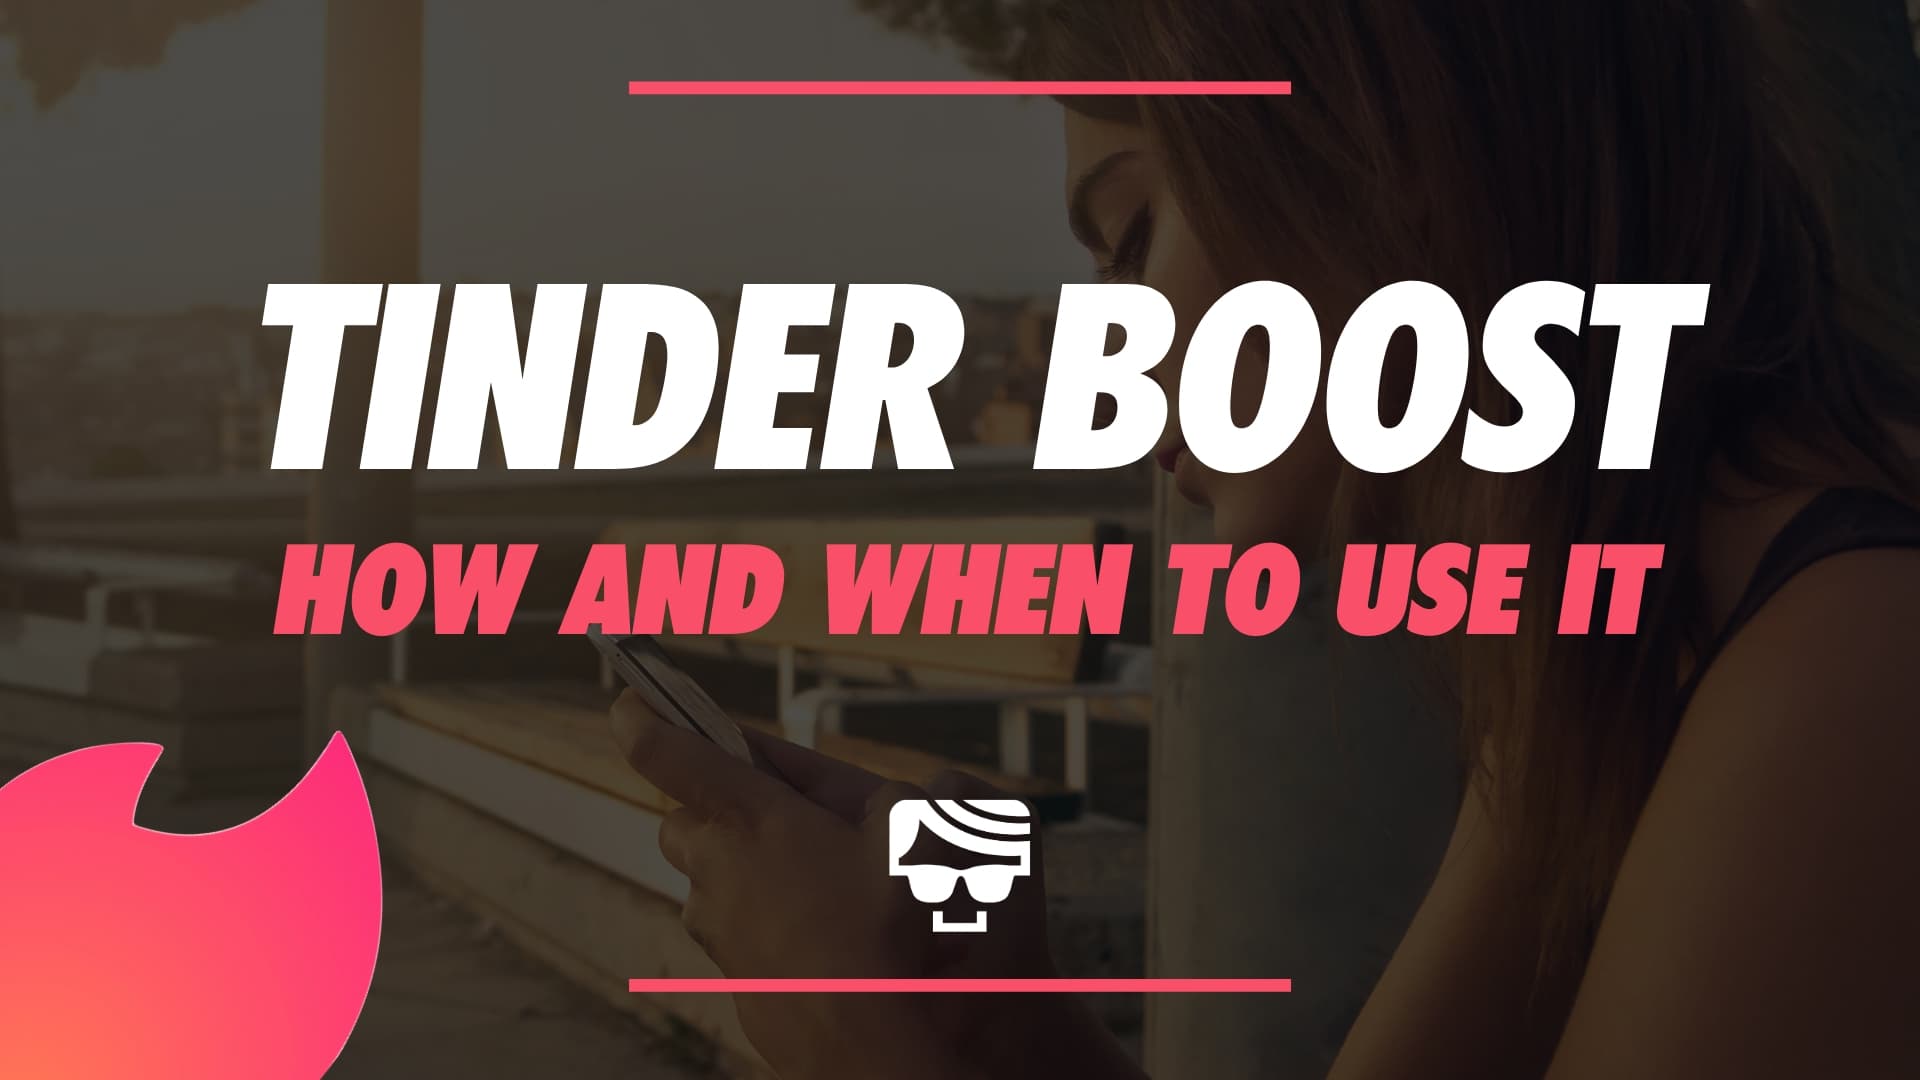 This is actually a post or even photo around the Tinder Boost Explained: 20...